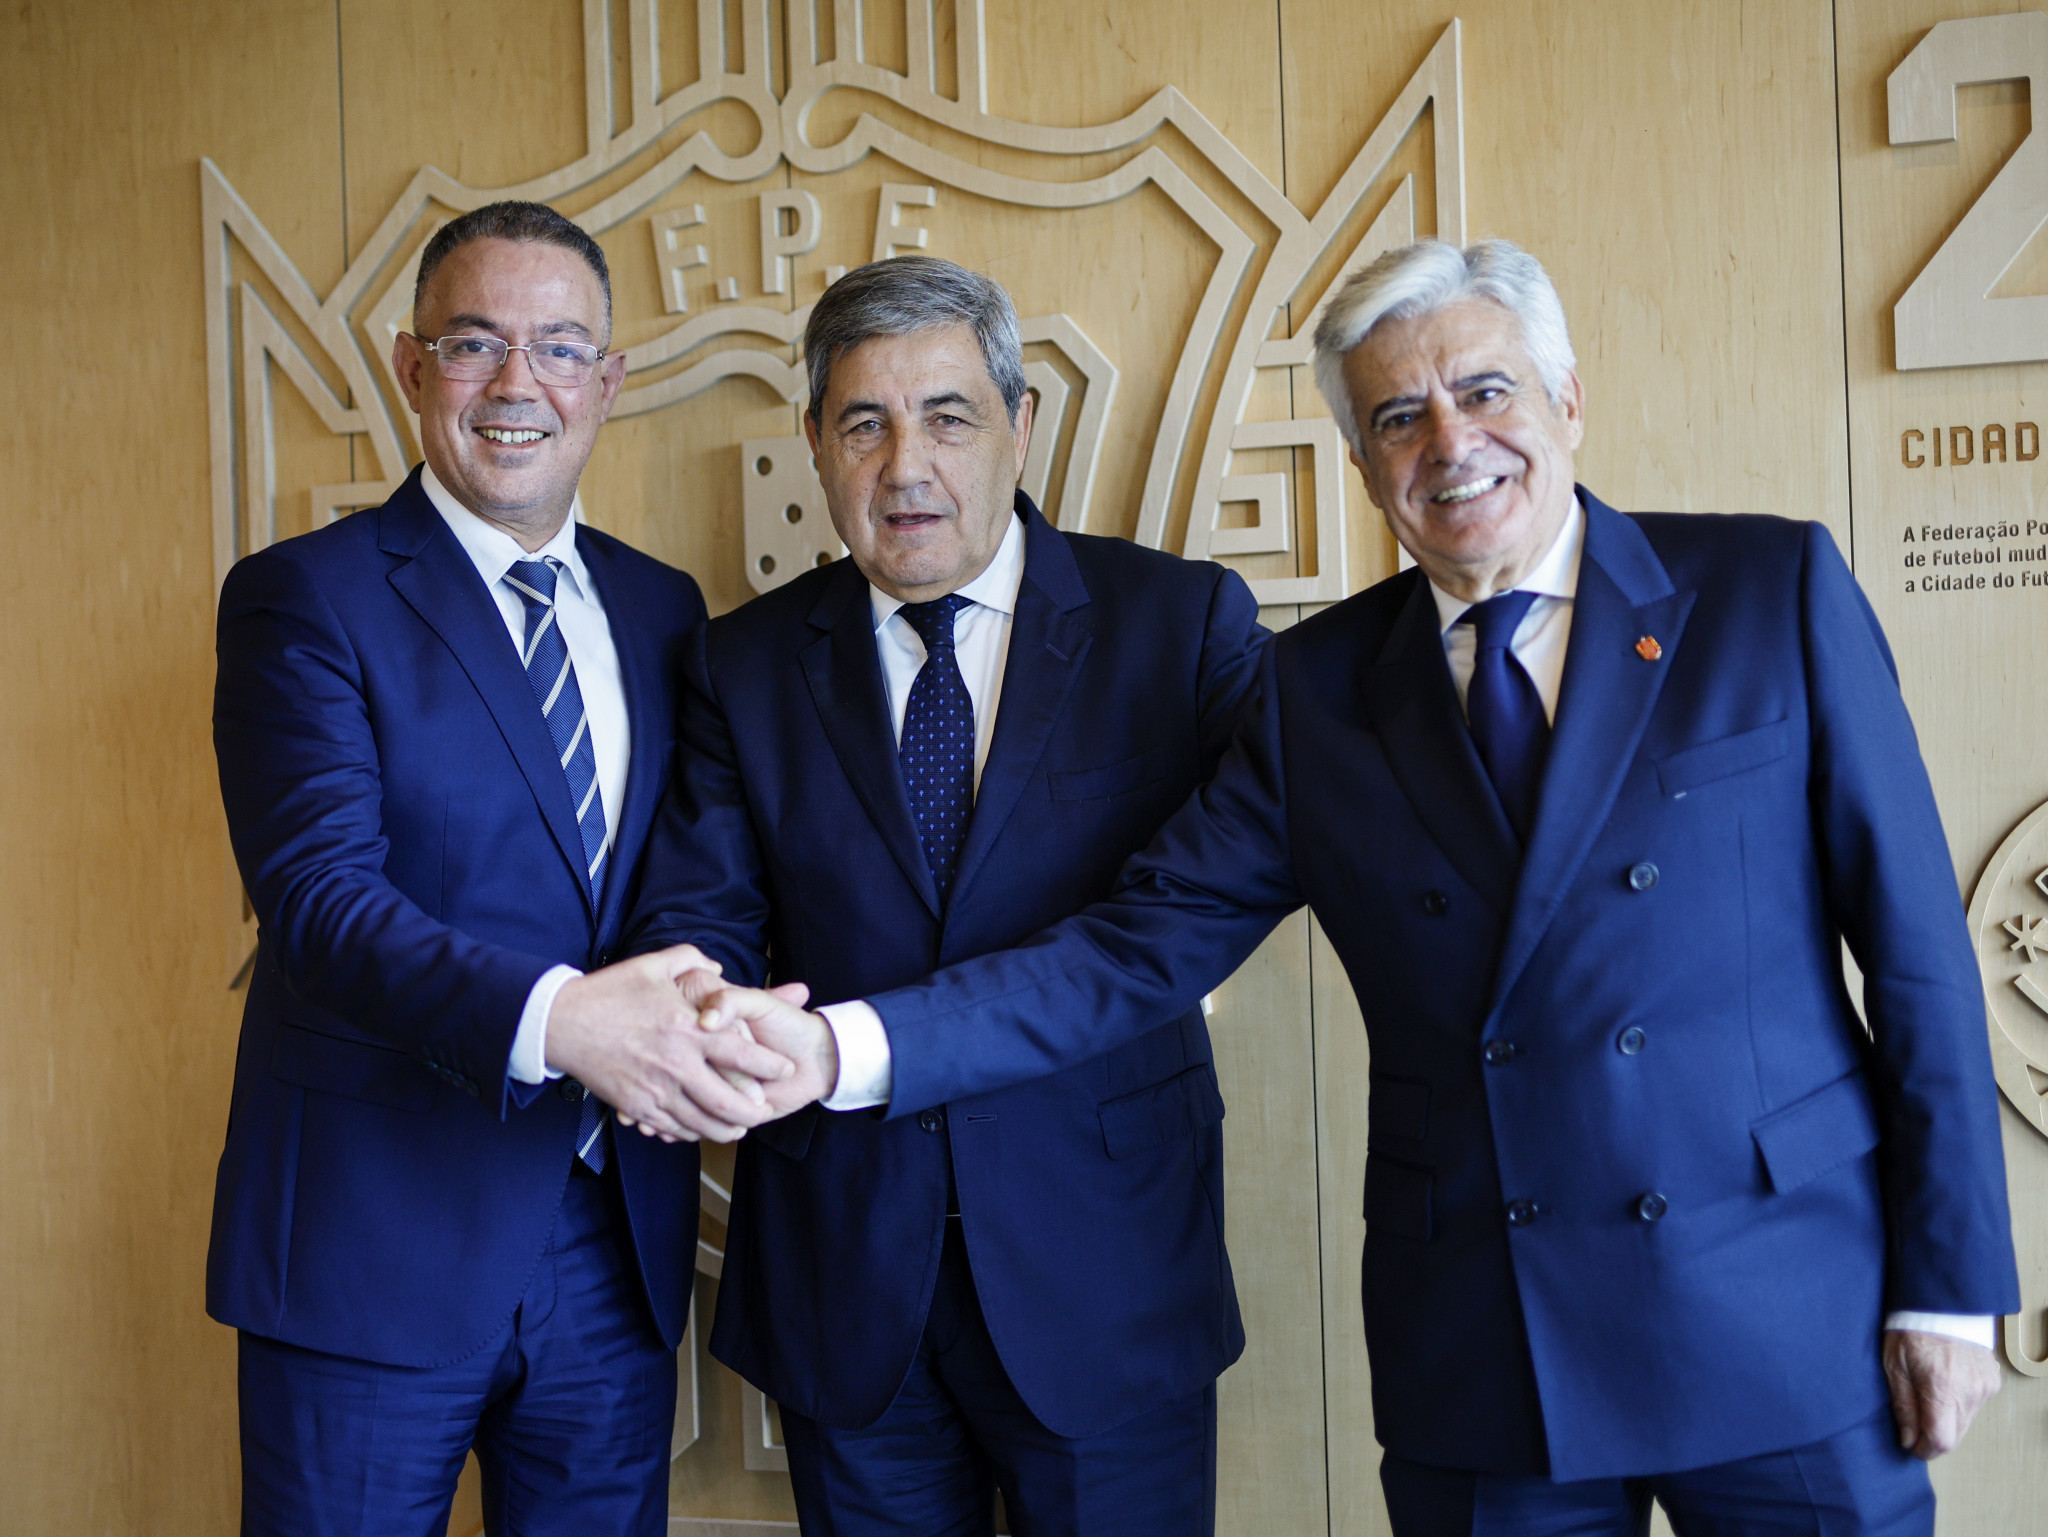 Respective Presidents of the Moroccan, Portuguese and Spanish FAs, from left Fouzi Lekjaa, Fernando Gomes and Pedro Rocha, agreed to present their formal letter of intent to FIFA on October 28, confirming their joint bid for the 2030 FIFA World Cup ©bcw sports